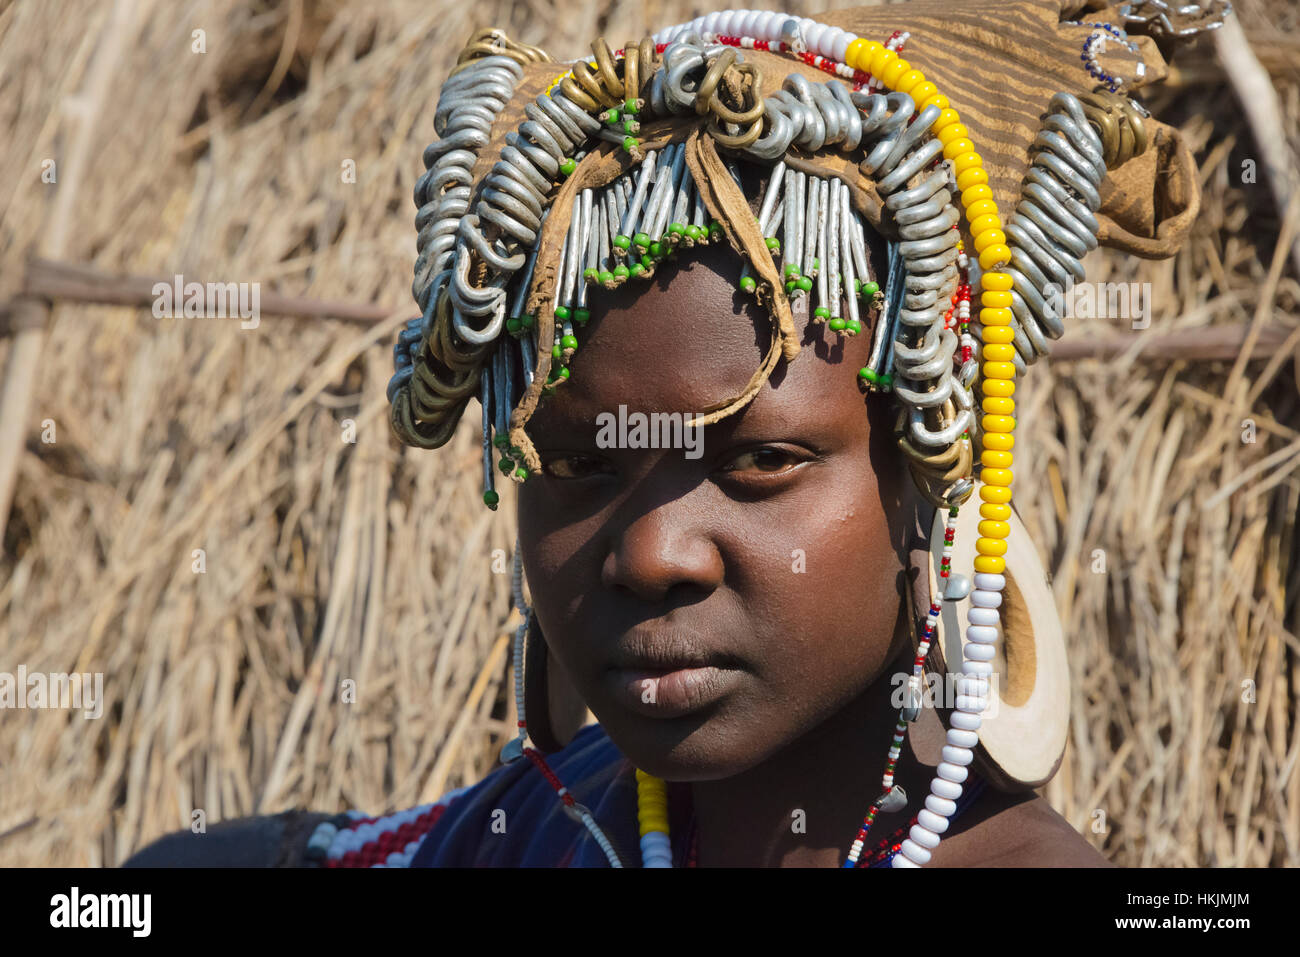 Mursi tribe people in traditional clothing, Mursi Village, South Omo, Ethiopia Stock Photo